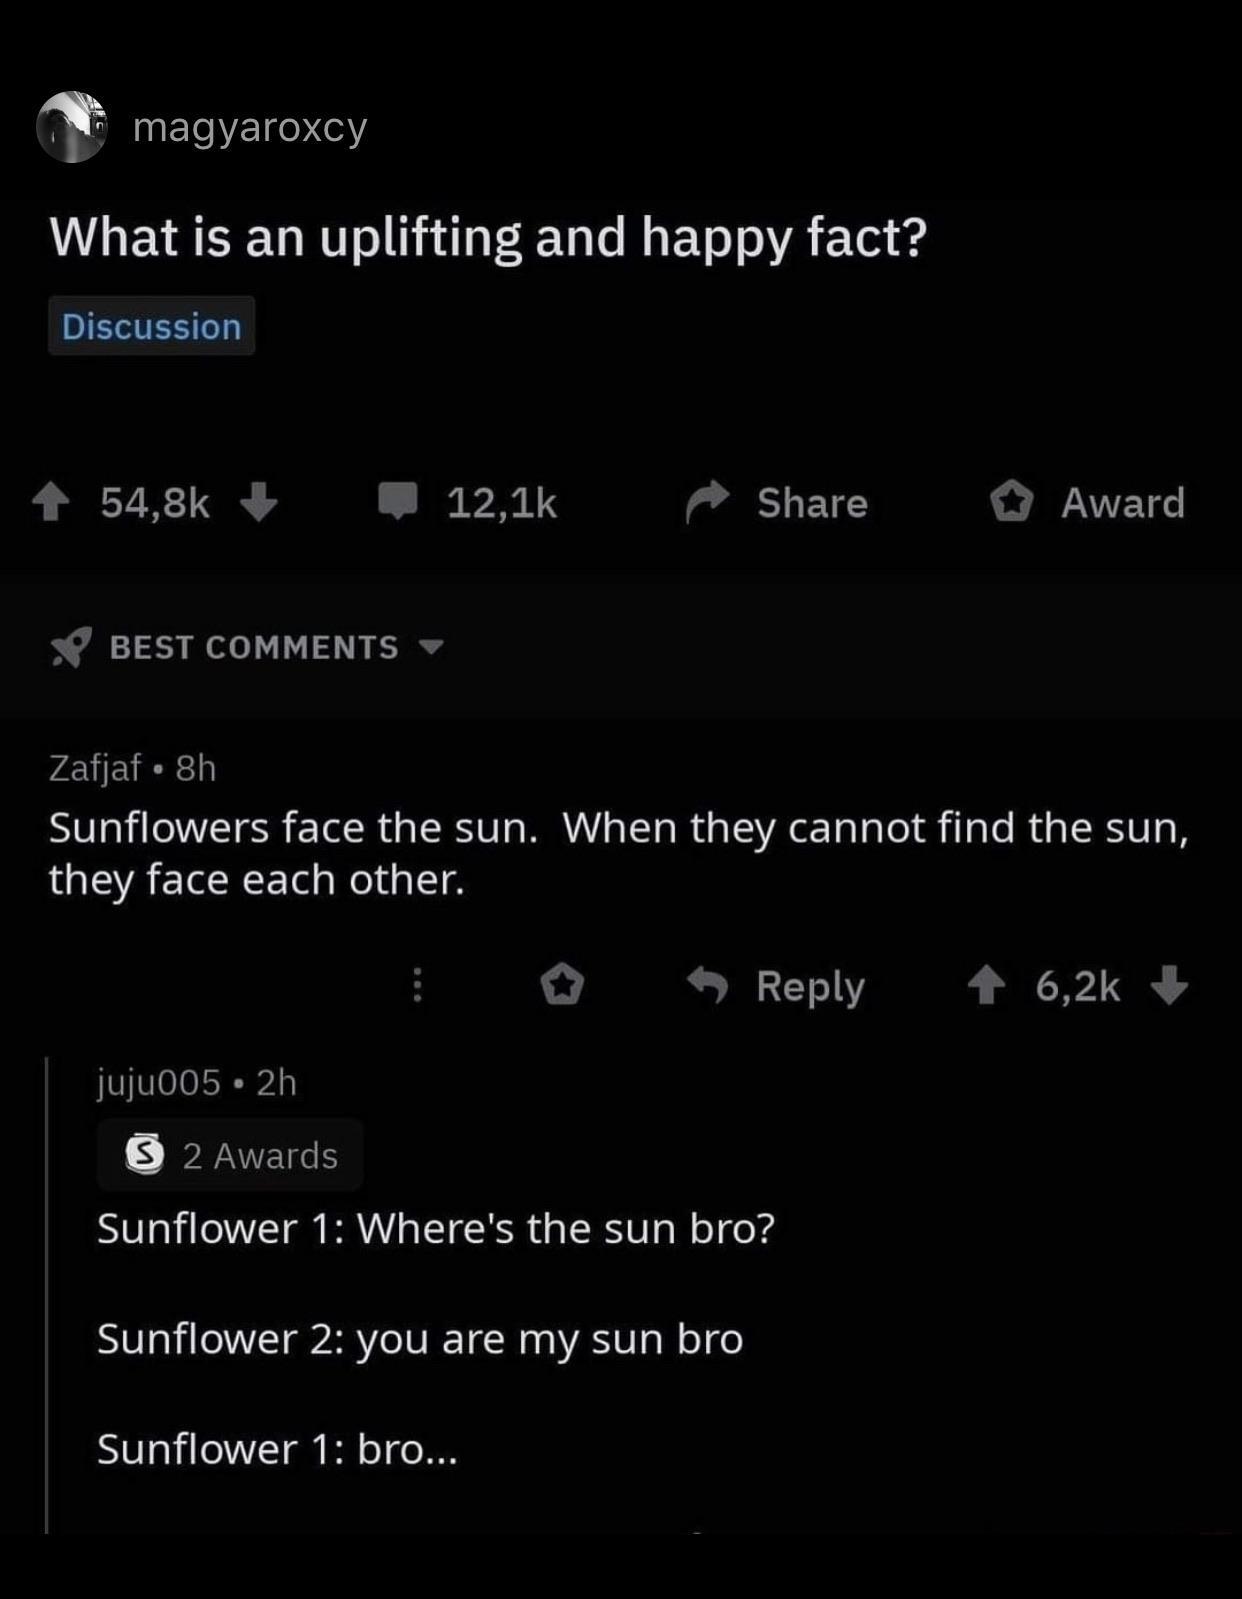 screenshot - magyaroxcy What is an uplifting and happy fact? Discussion 54,8% Award S Best Zafjaf. 8h Sunflowers face the sun. When they cannot find the sun, they face each other. juju005 2h 2 Awards Sunflower 1 Where's the sun bro? Sunflower 2 you are my